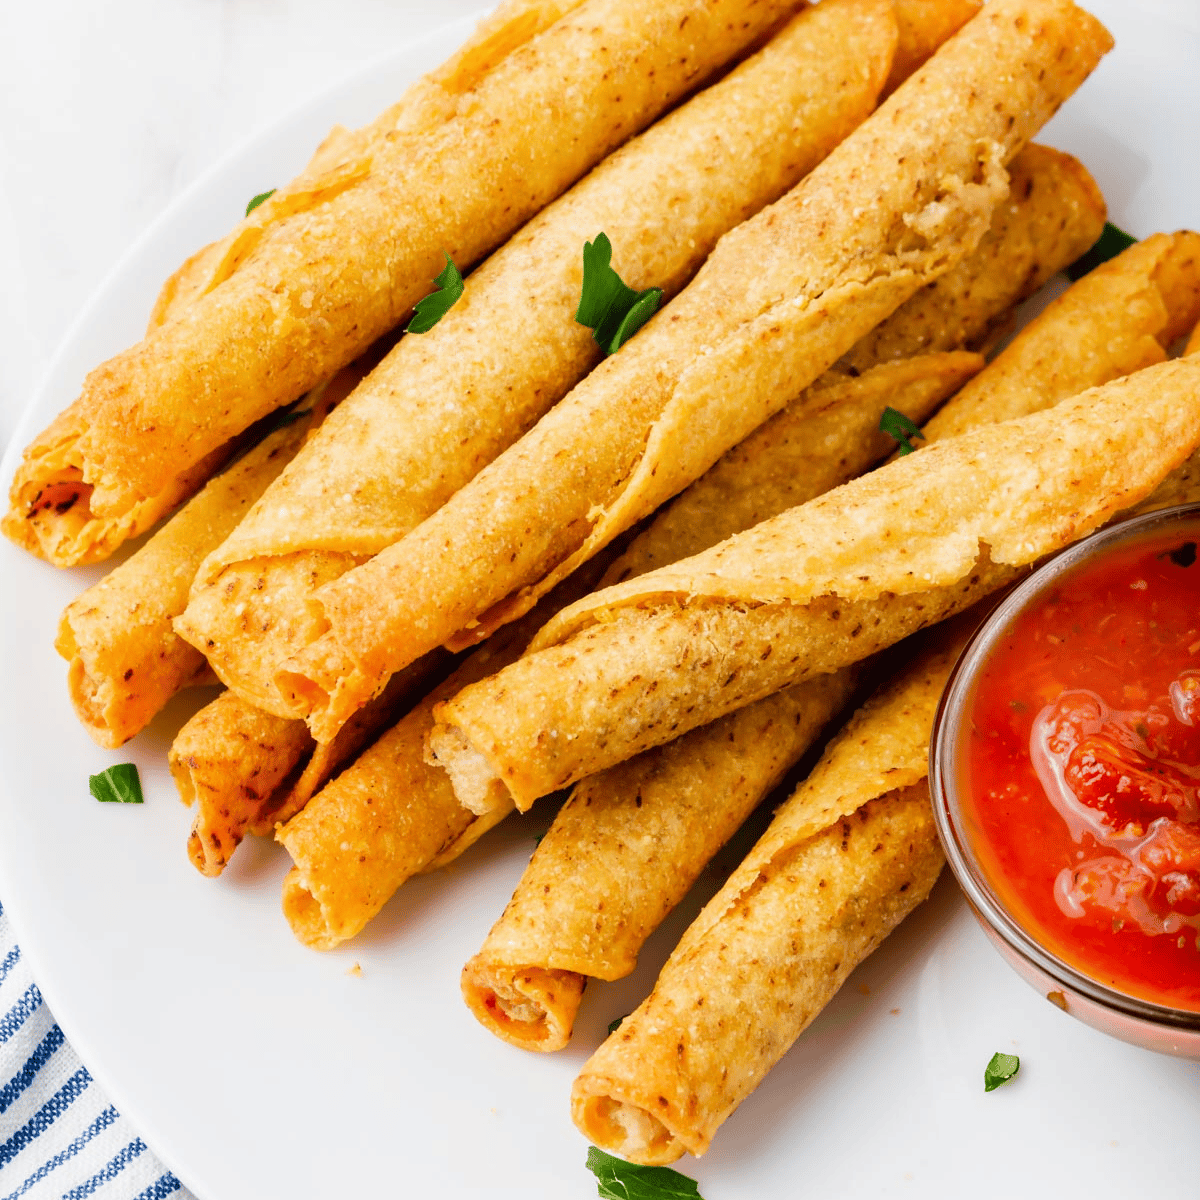 Taquitos that were cooked in an air fryer, on a plate with a side of sauce